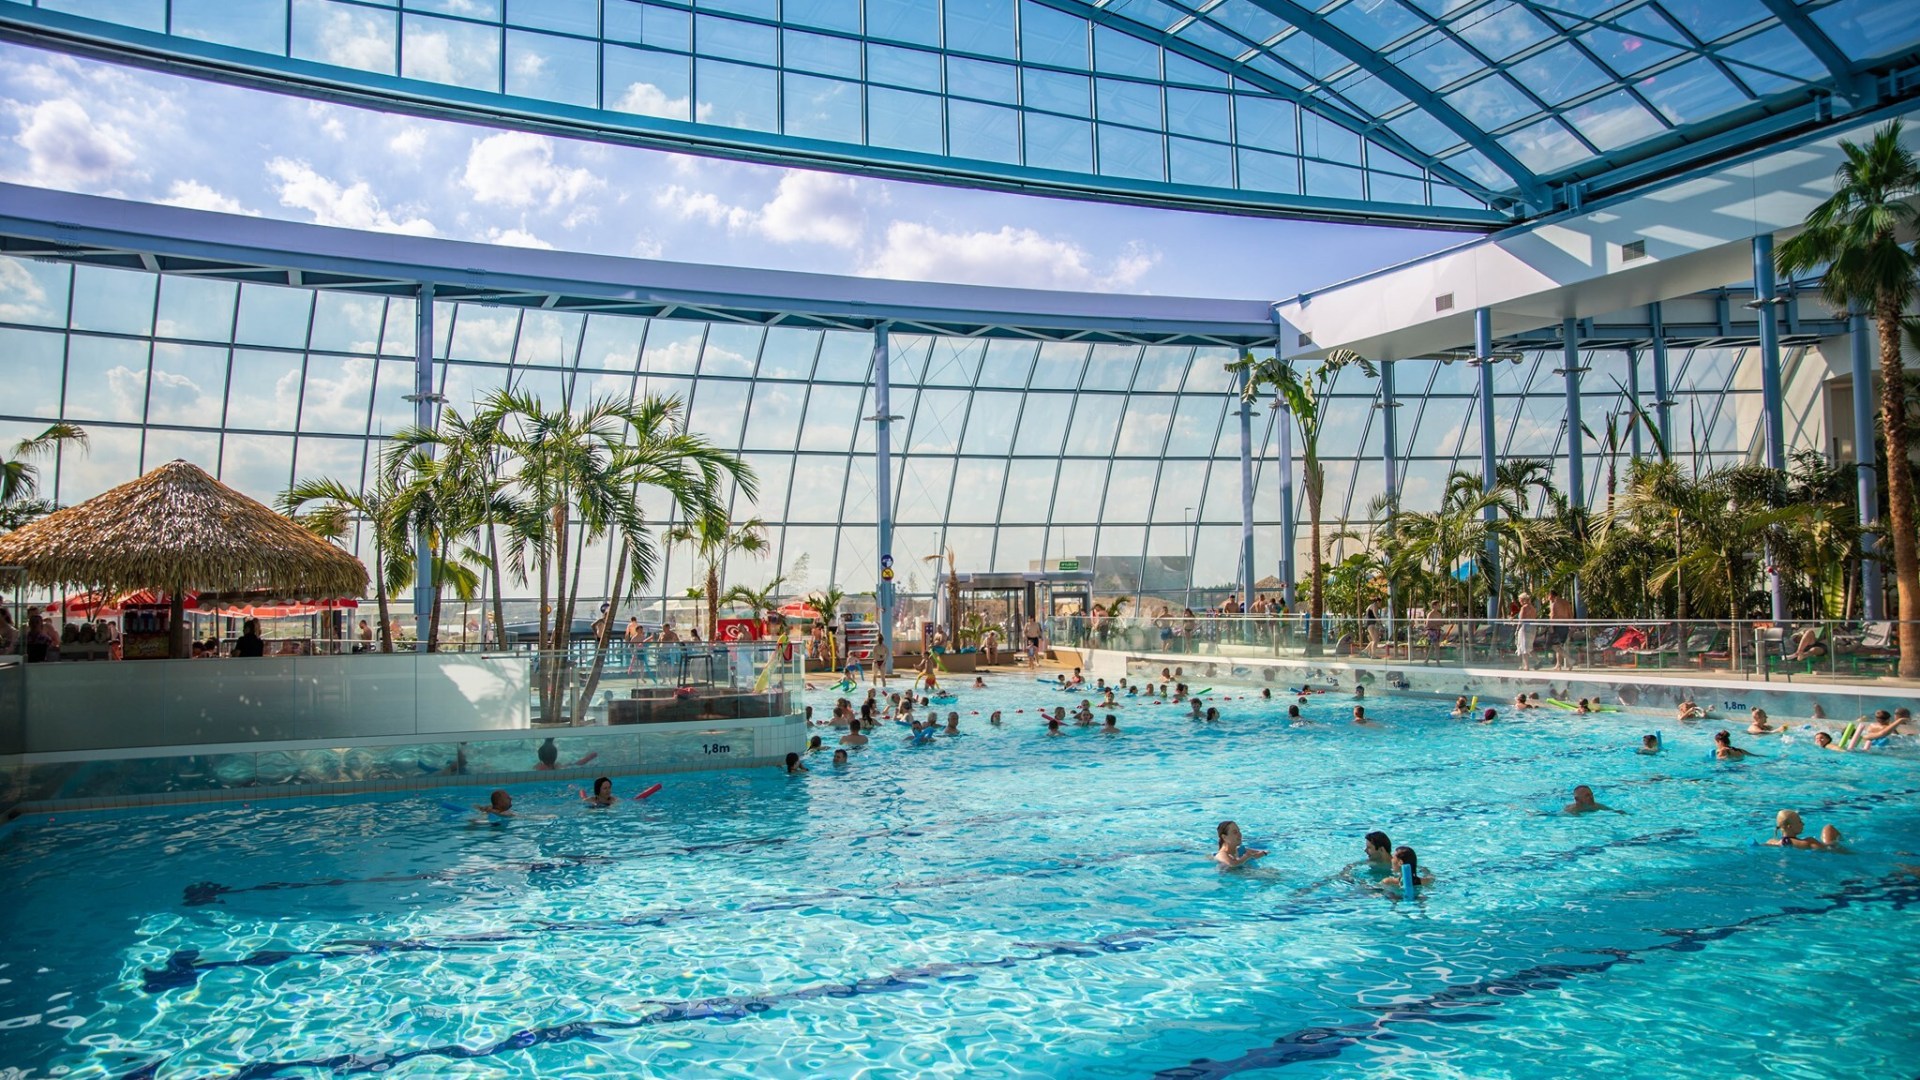 Europe’s largest indoor water park thats 32C all year round reveals new ‘island’ attraction opening this year [Video]